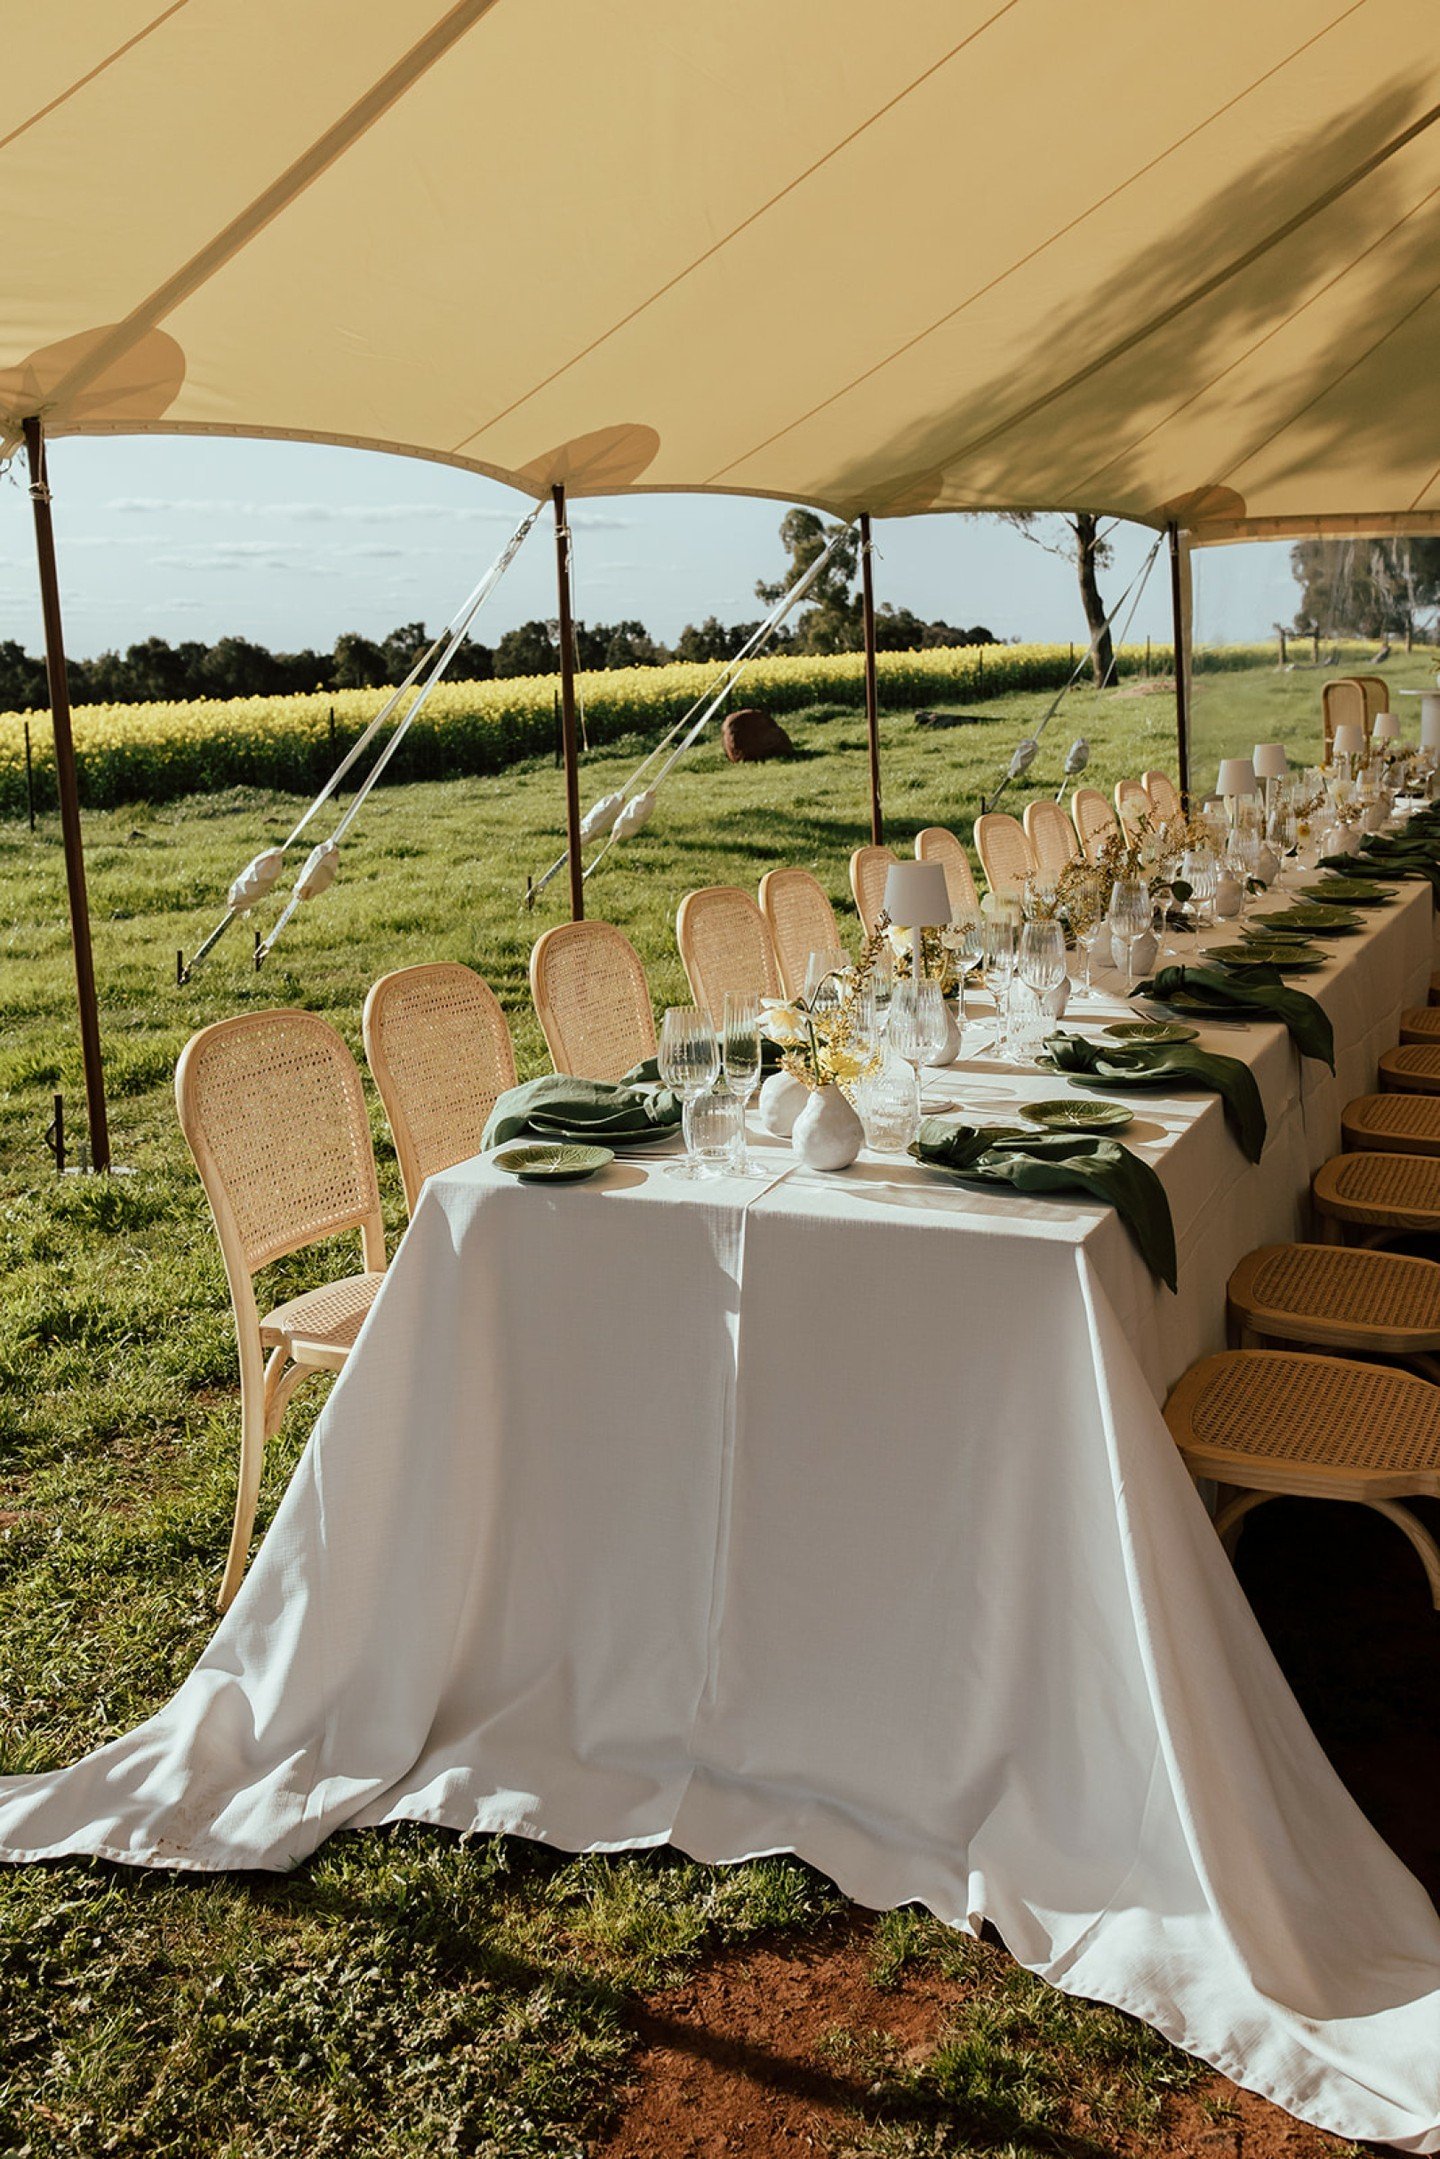 Dining with views for days!!
Featuring our weave tablecloths, forest green napkins, rattan chairs and timber trestles under the gorgeous Hampton marquee.
Stunning crockery, glassware and lamps from @social.eventhire

Venue @ryeattallis
Marquee and fu